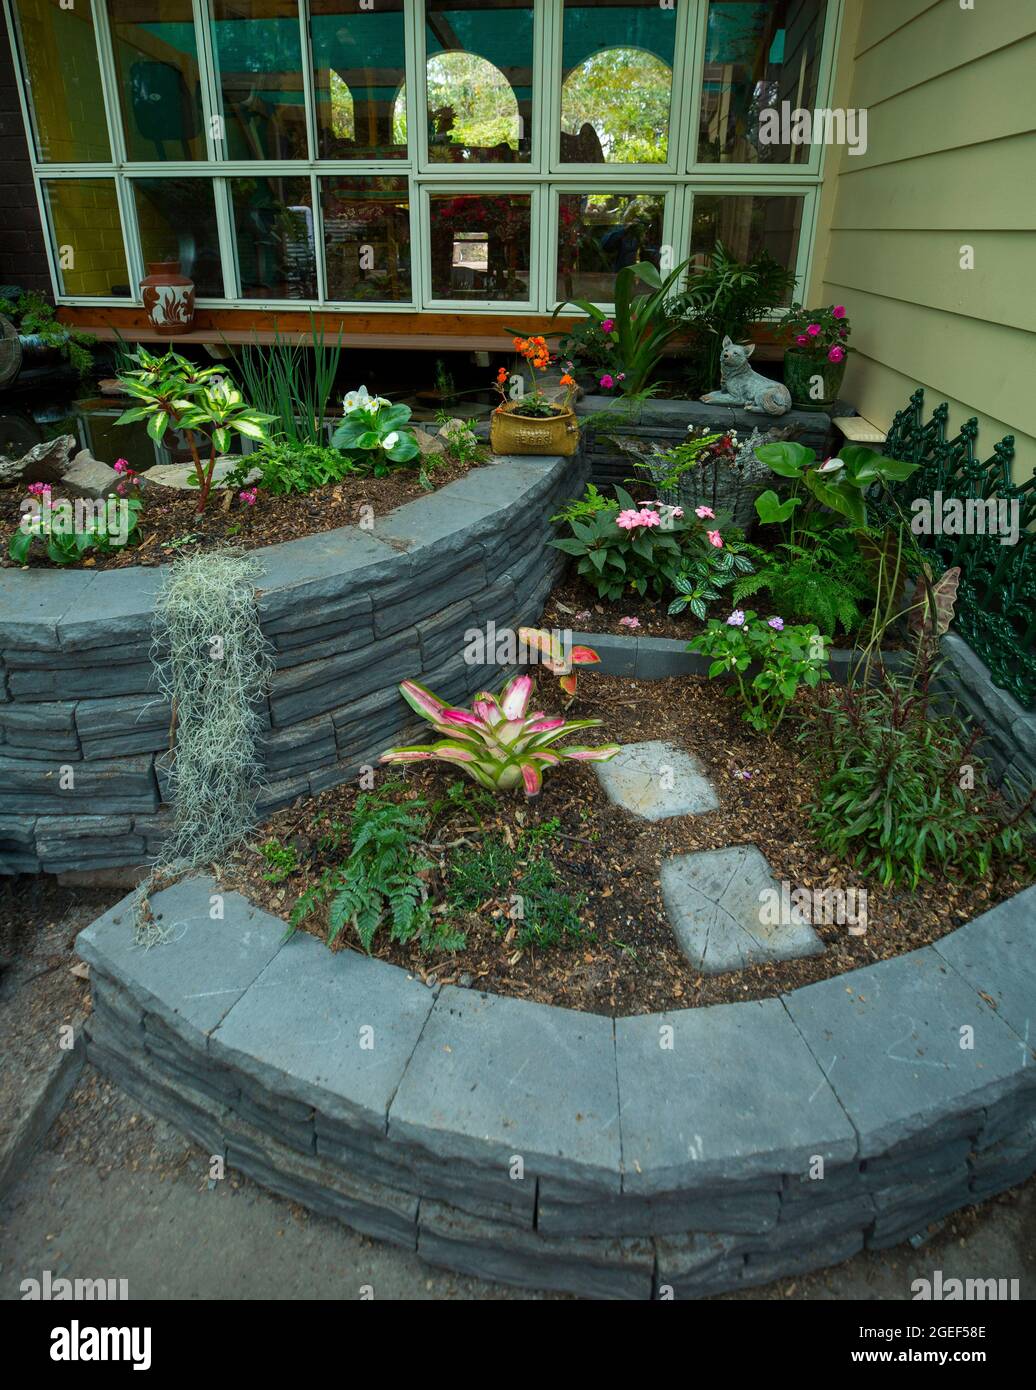 Garden feature with decorative curved brick retaining walls surrounding garden beds in a  fernery, in Australia Stock Photo